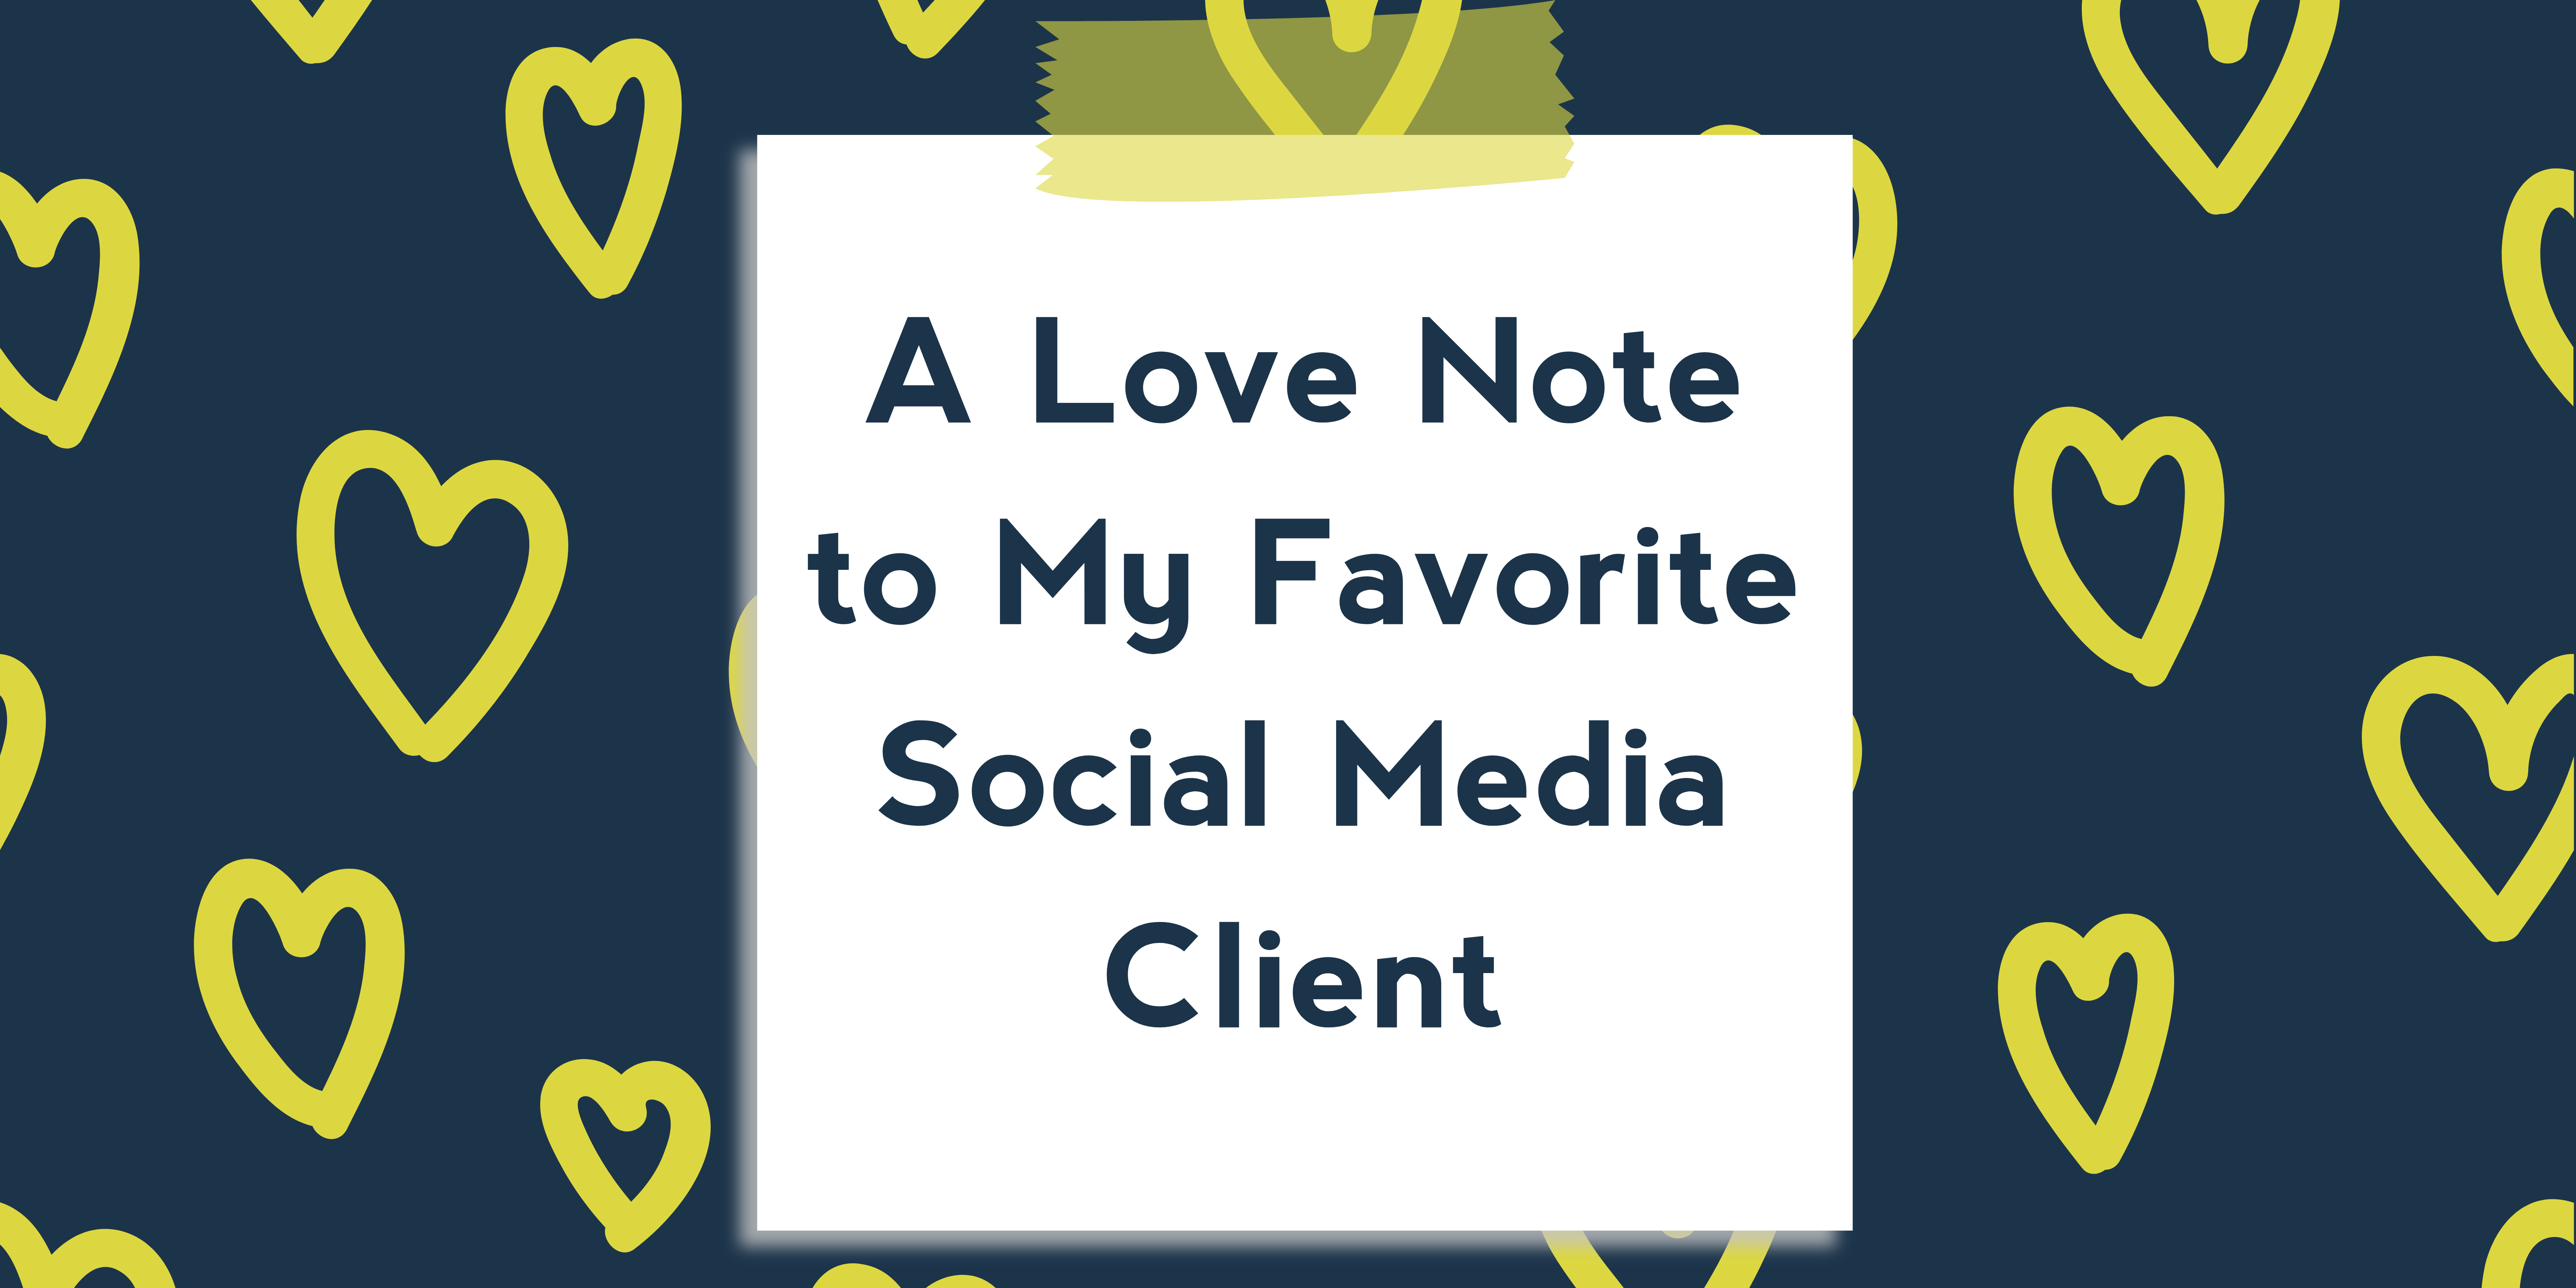 A Love Note to My Favorite Social Media Client